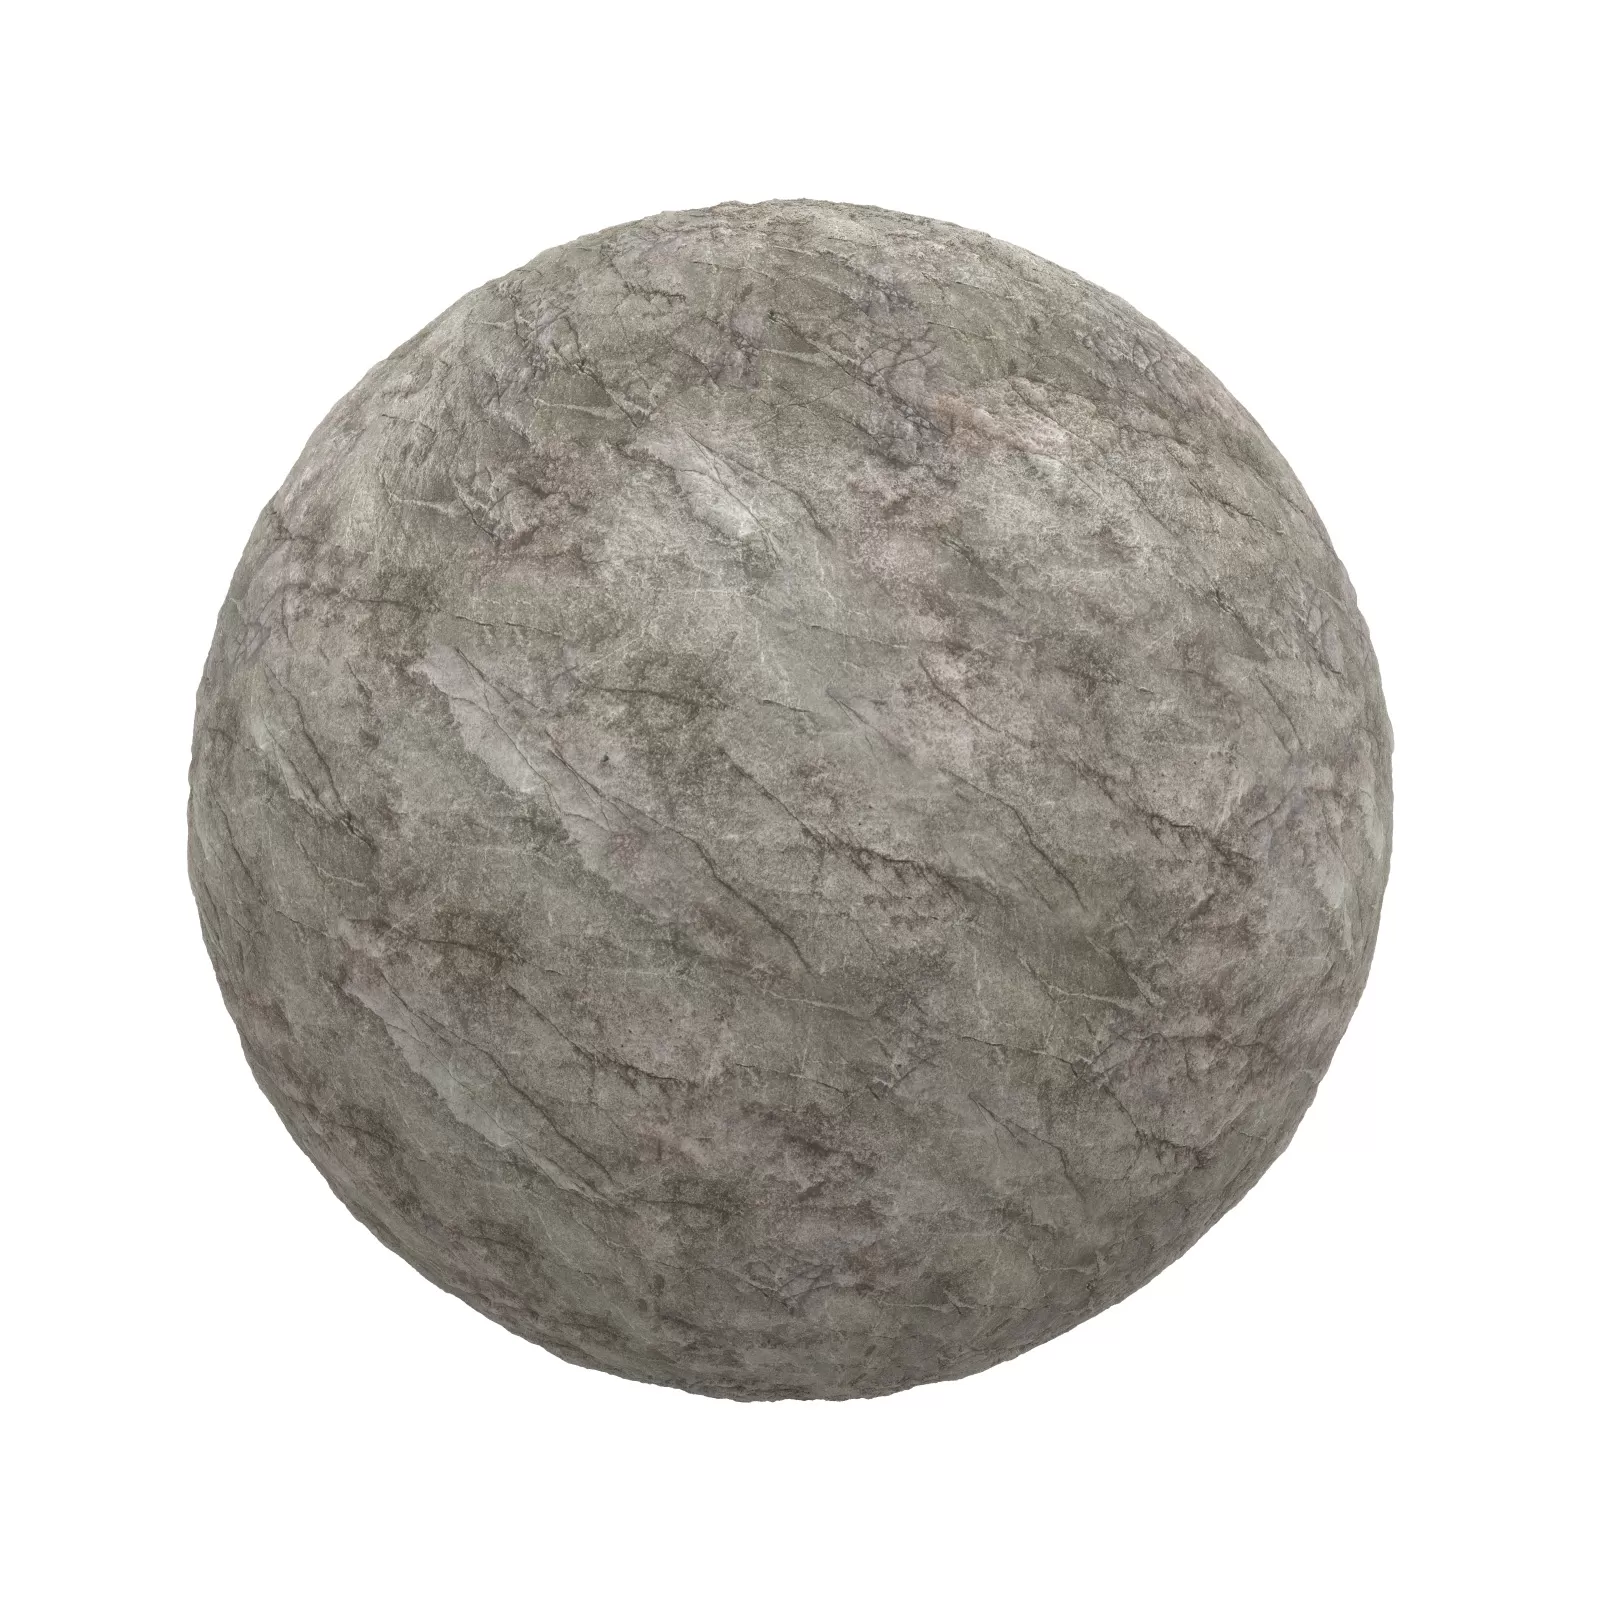 TEXTURES – STONES – CGAxis PBR Colection Vol 1 Stones – rough grey stone 5